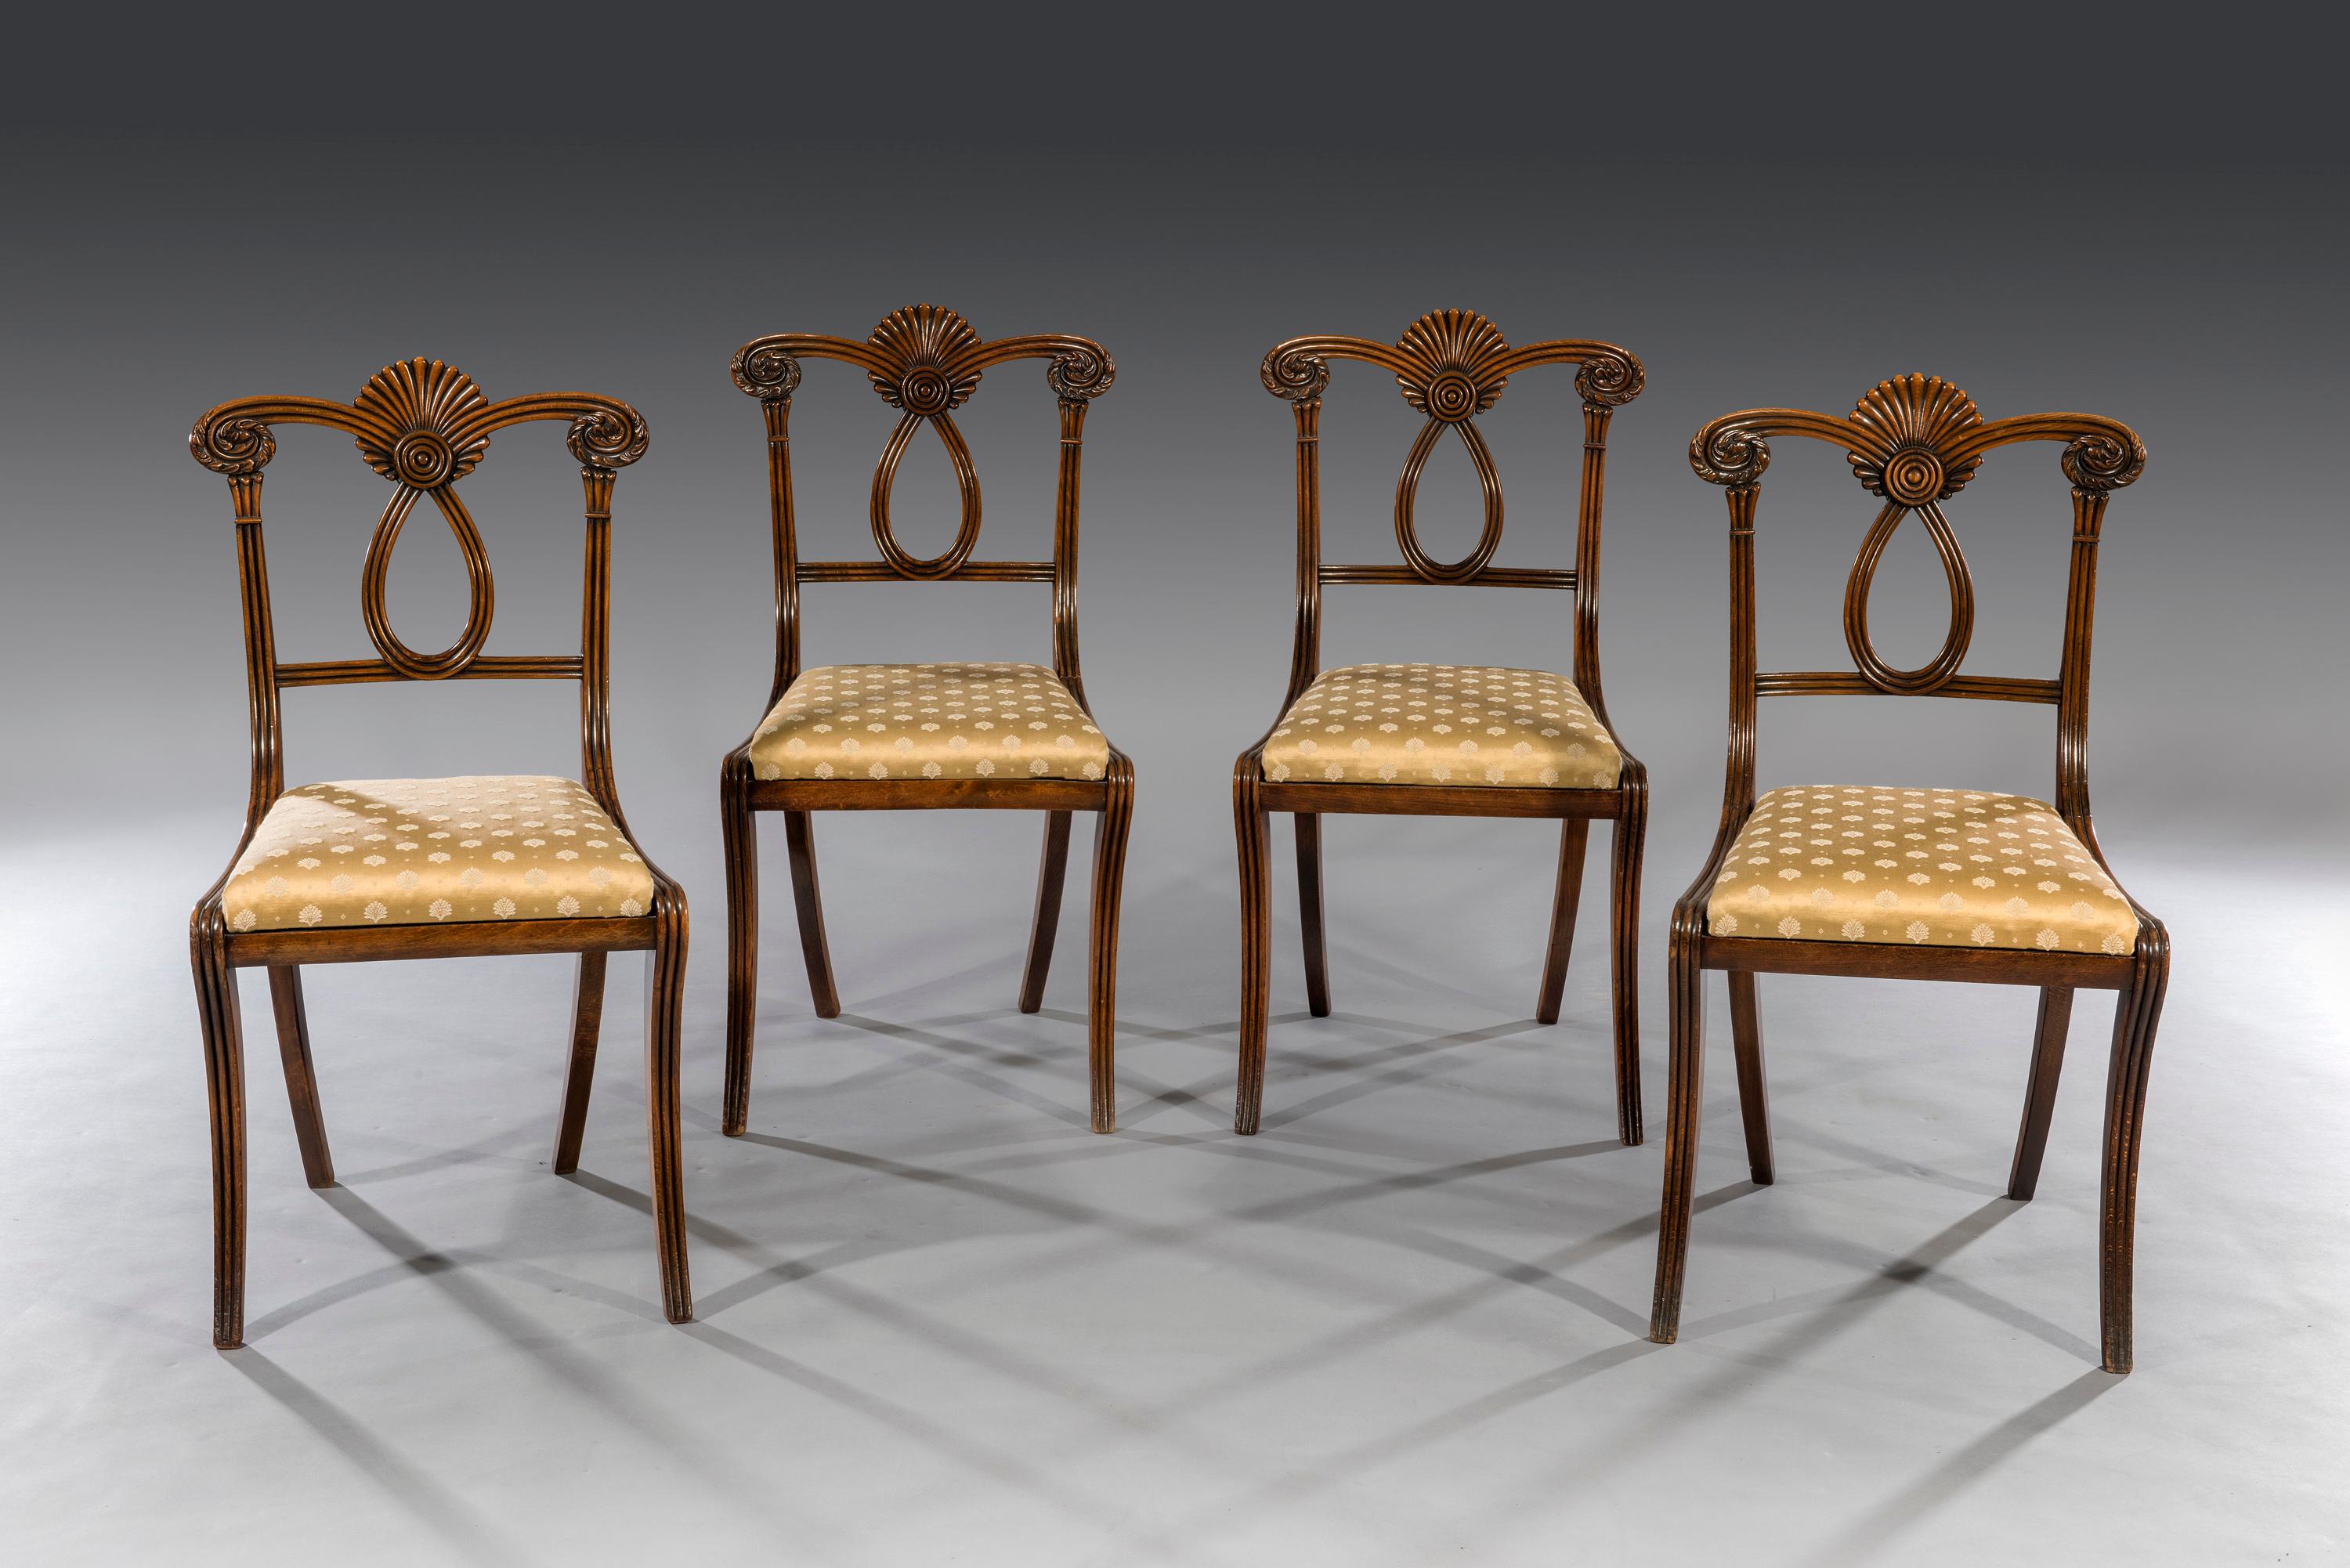 Set of Four Early 19th Century Regency Period Carved Beechwood Side Chairs In Good Condition For Sale In Bradford on Avon, GB